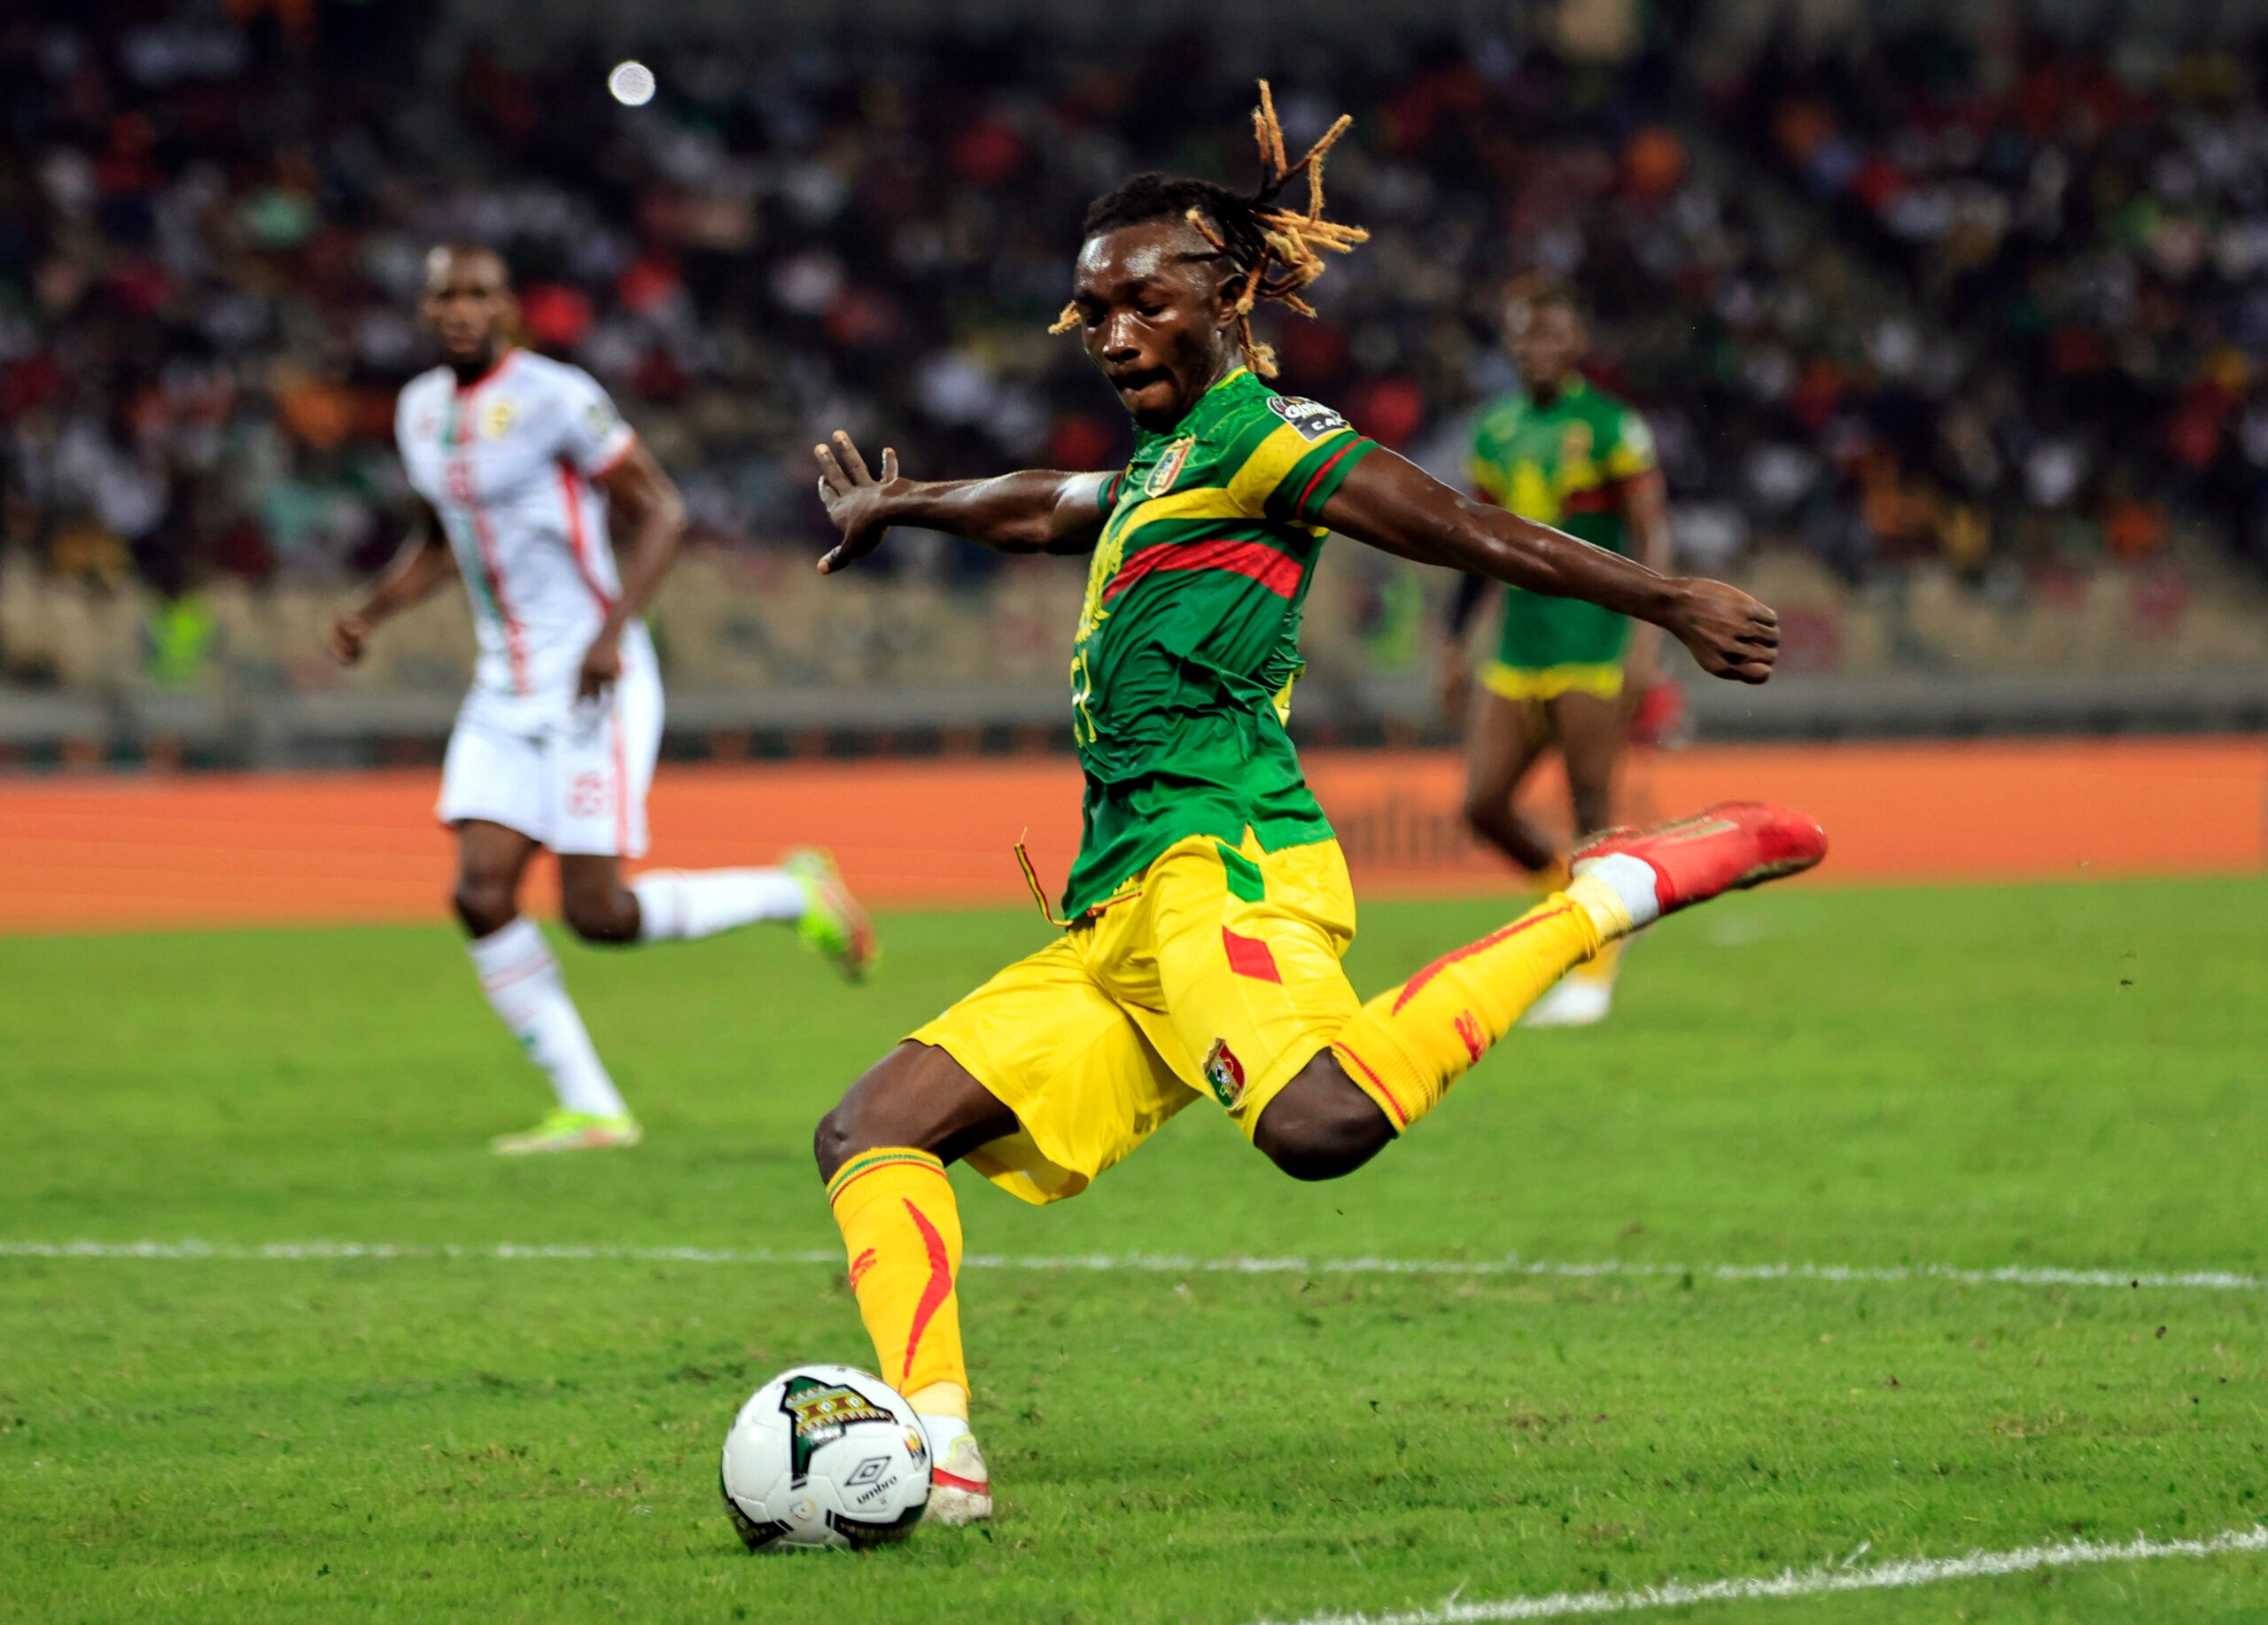 Soccer Football - Africa Cup of Nations - Group F - Mali v Mauritania - Stade de Japoma, Douala, Cameroon - January 20, 2022 Mali's Adama Traore in action REUTERS/Thaier Al-Sudani